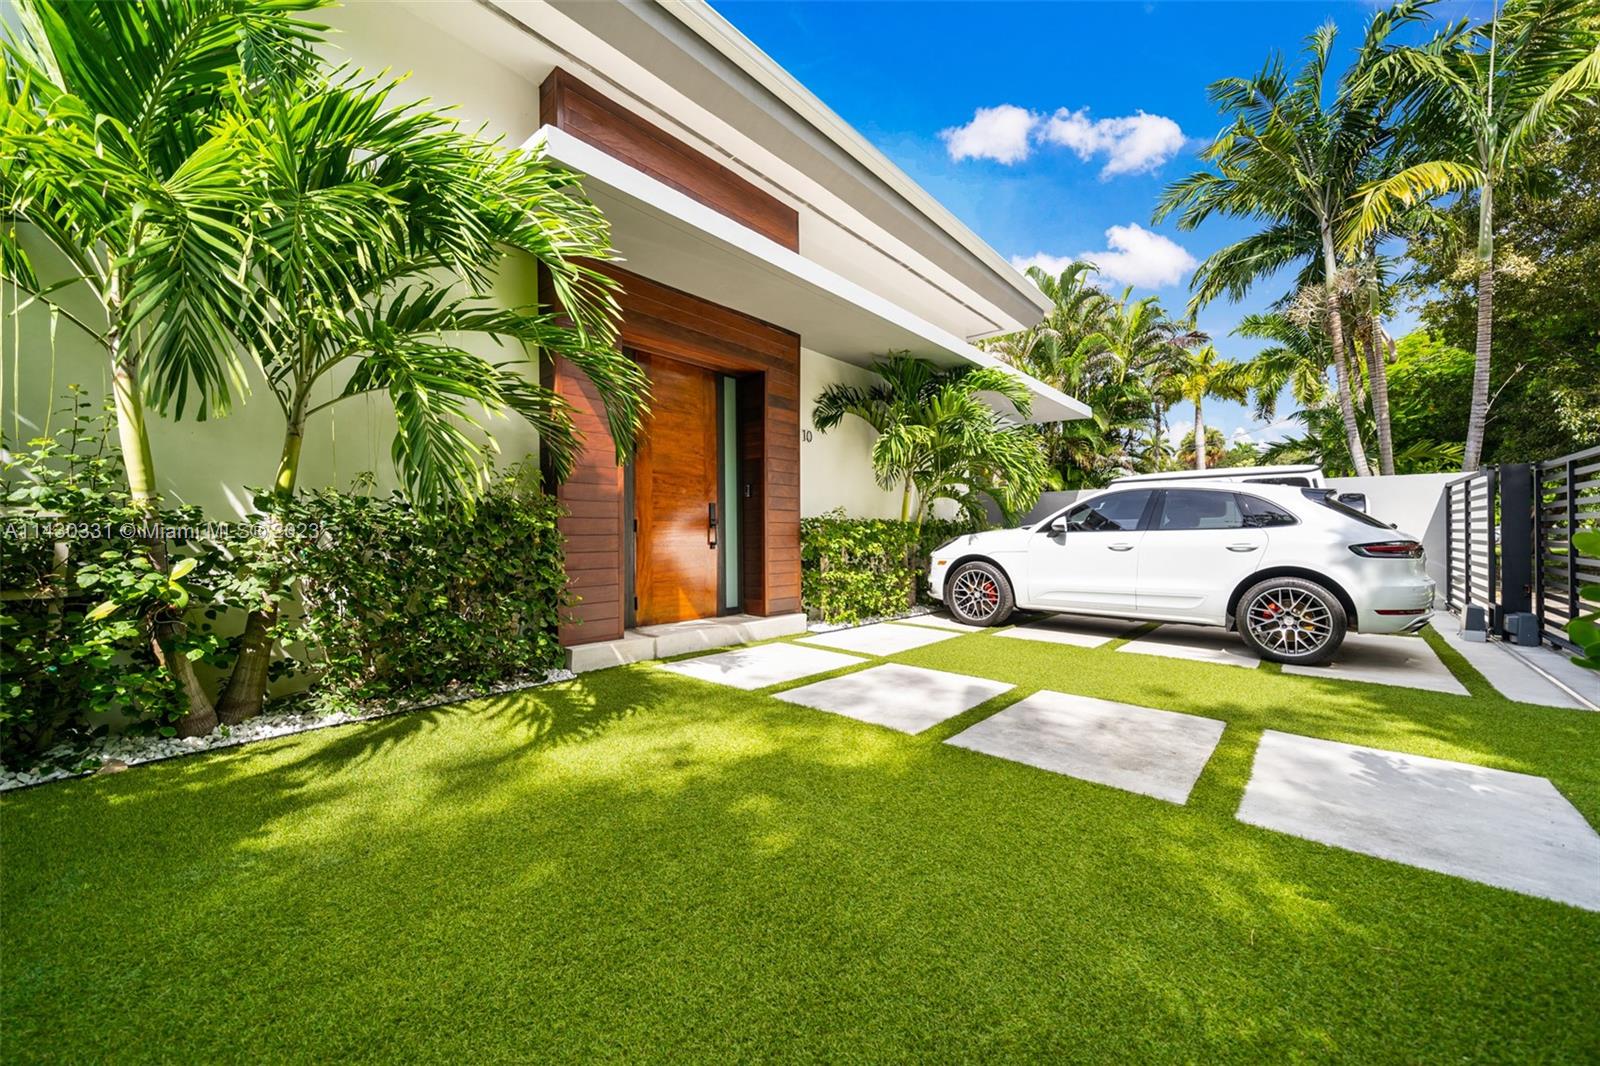 First time on the market! This turn-key modern home is just 1 block from Brickell and is ready to move in. High ceilings, gated property with security cameras, modern kitchen with quartz countertops, large closet in primary suite, beautiful pool with low maintenance artificial turf throughout.